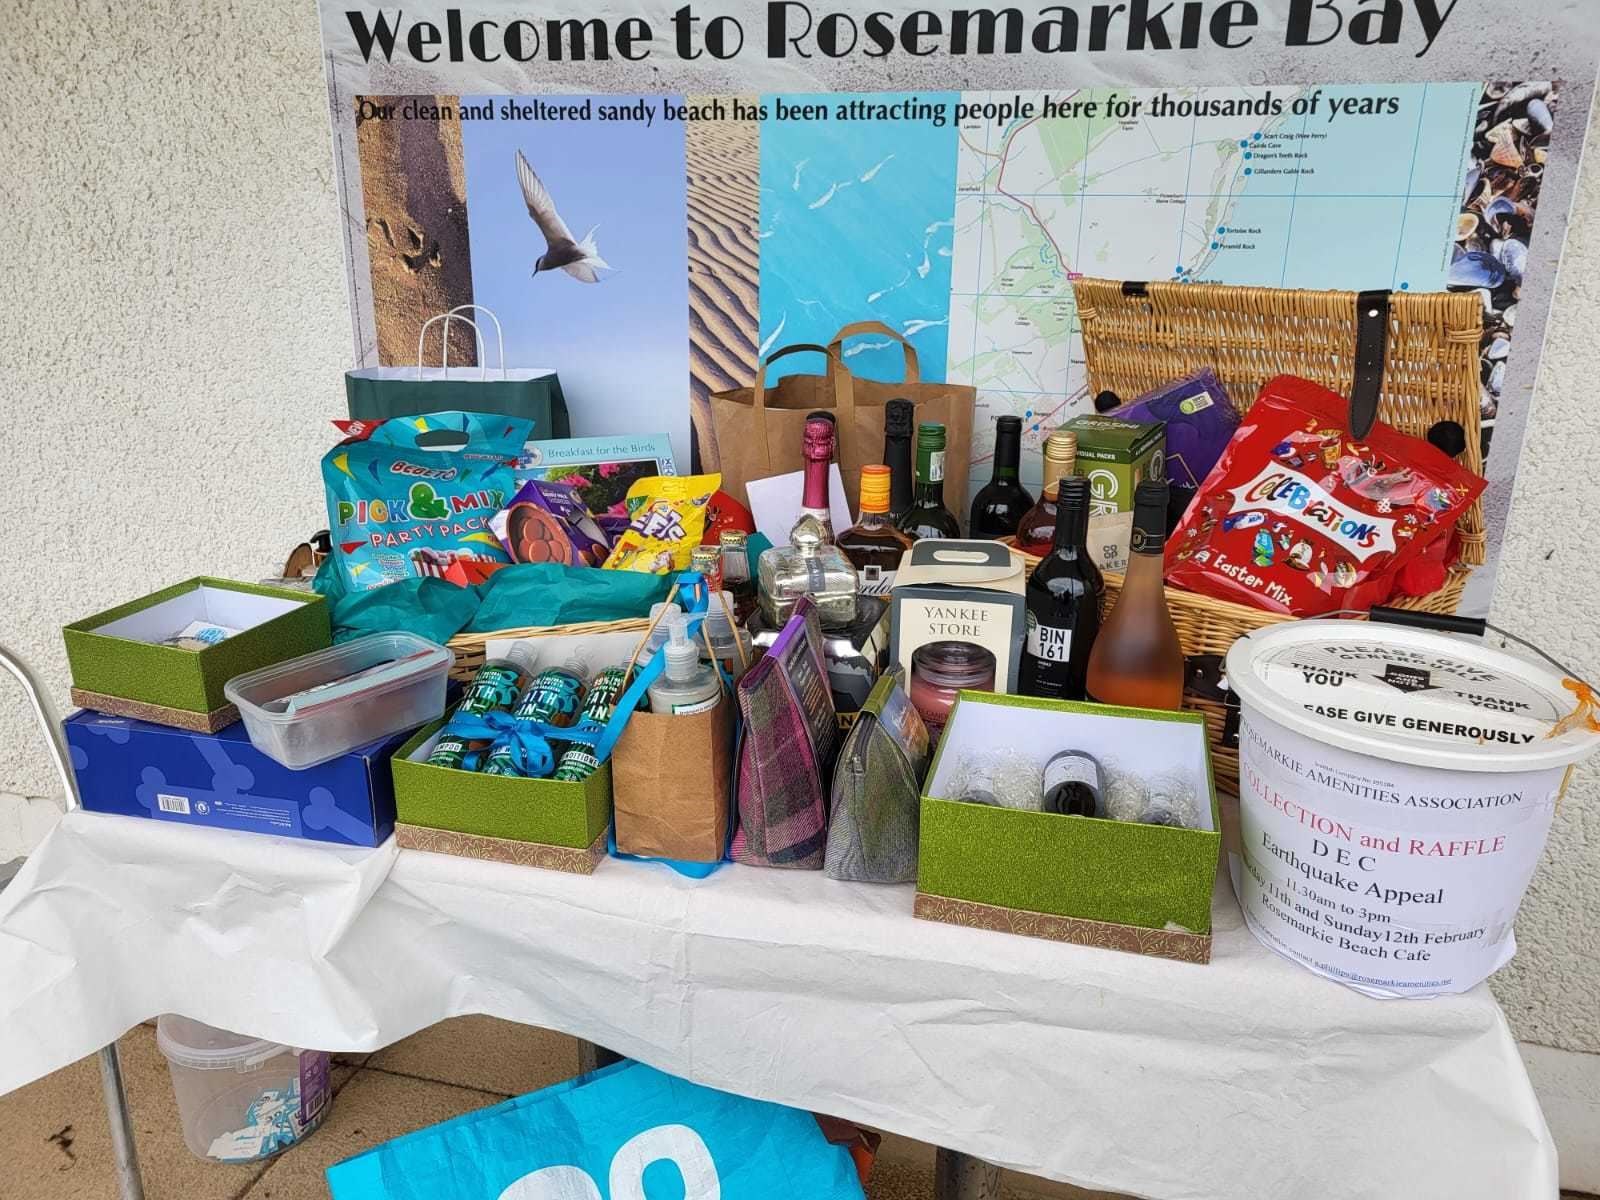 Businesses and well-wishers came forward to support a fundraising raffle.